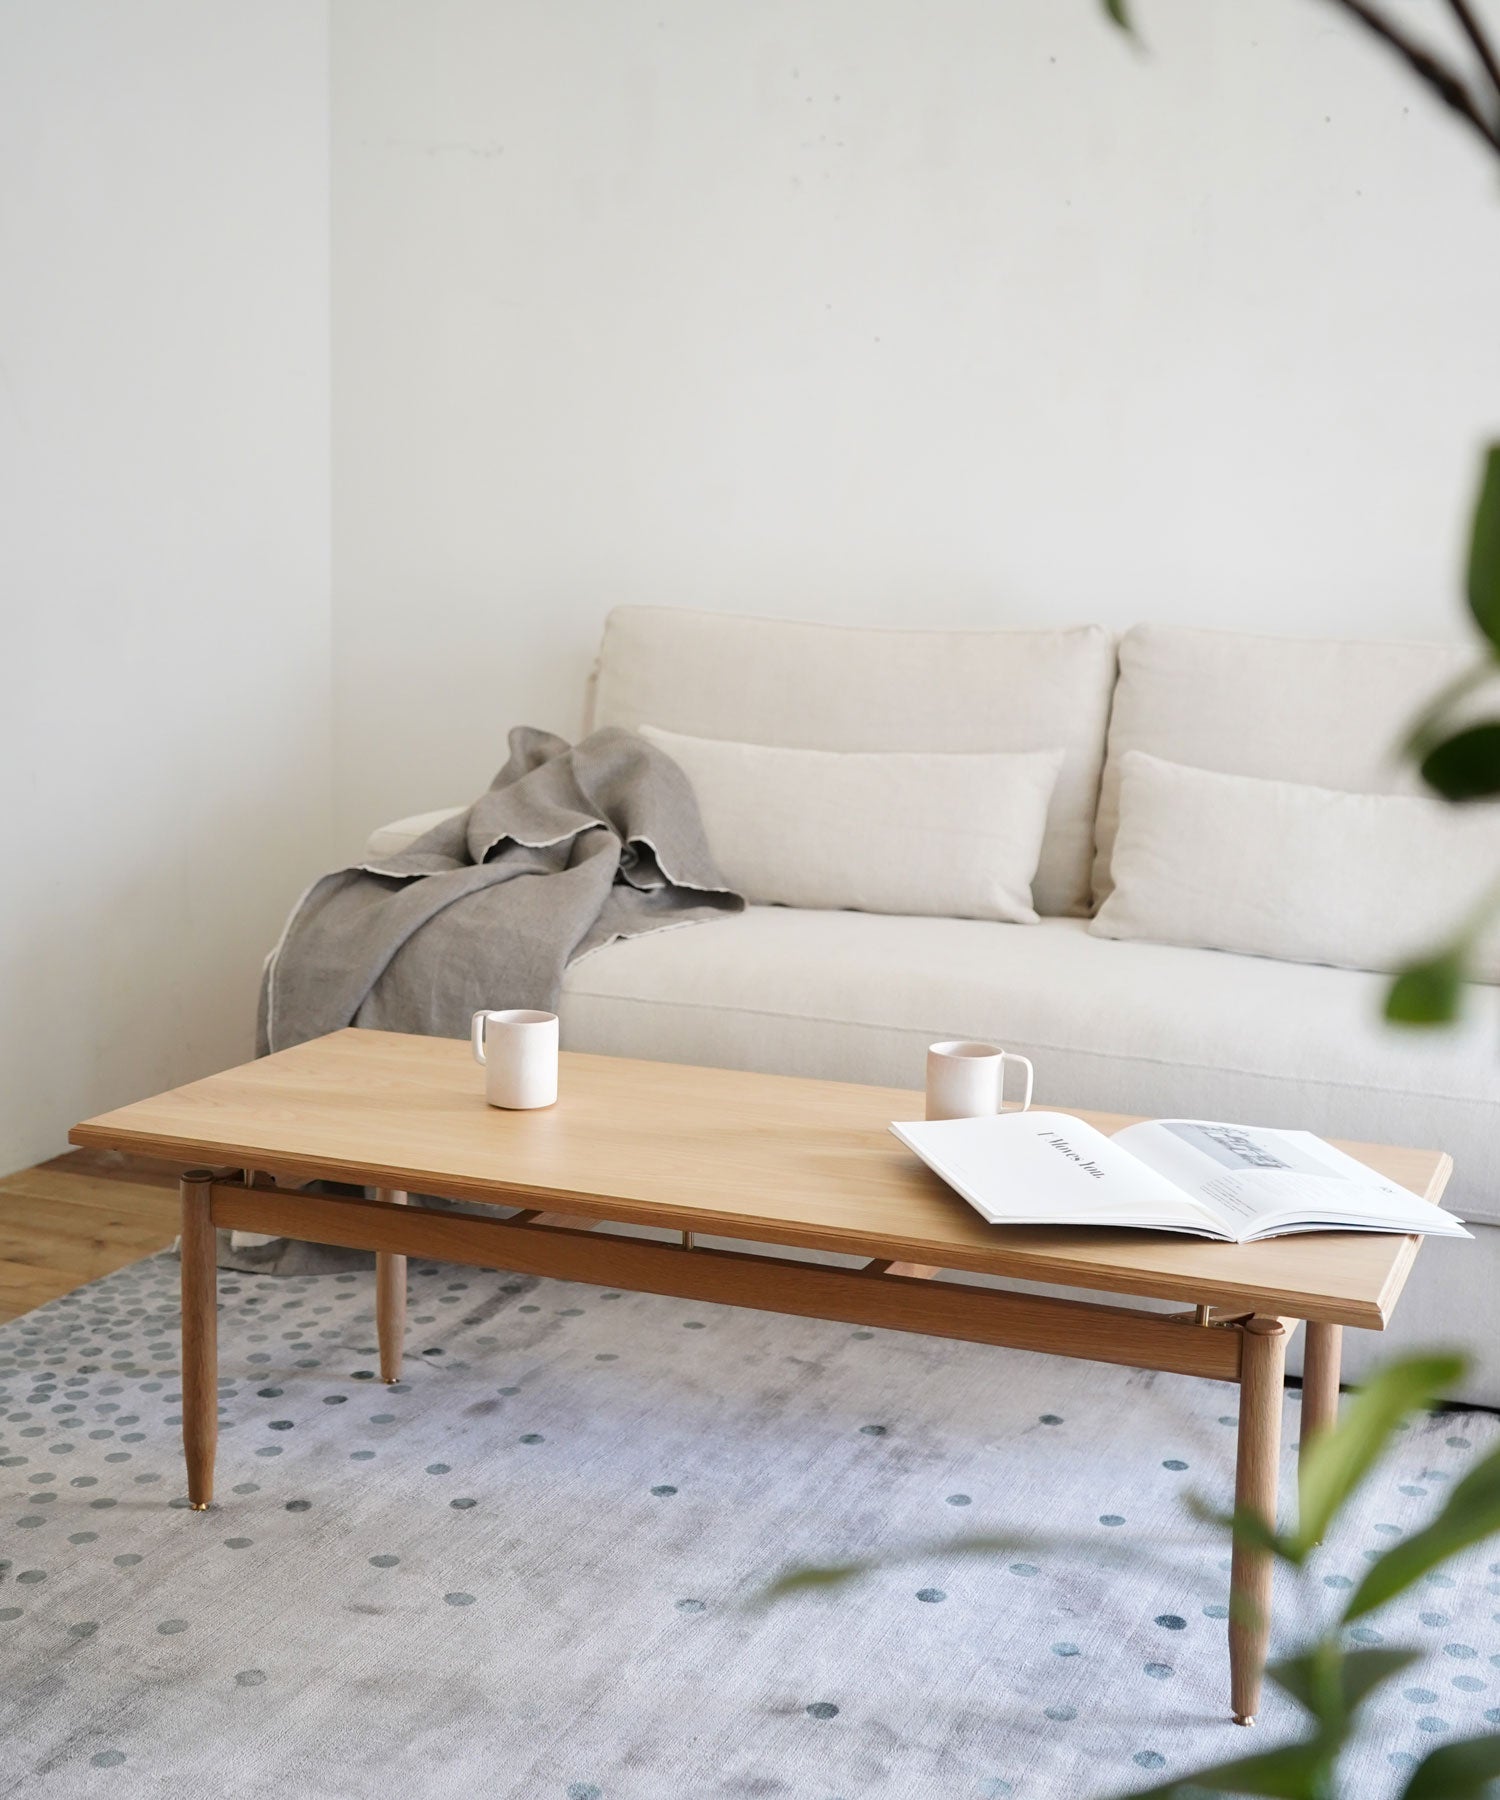 ēcruxe（エクリュクス）EPI COFFEE TABLE – TIMELESS COMFORT